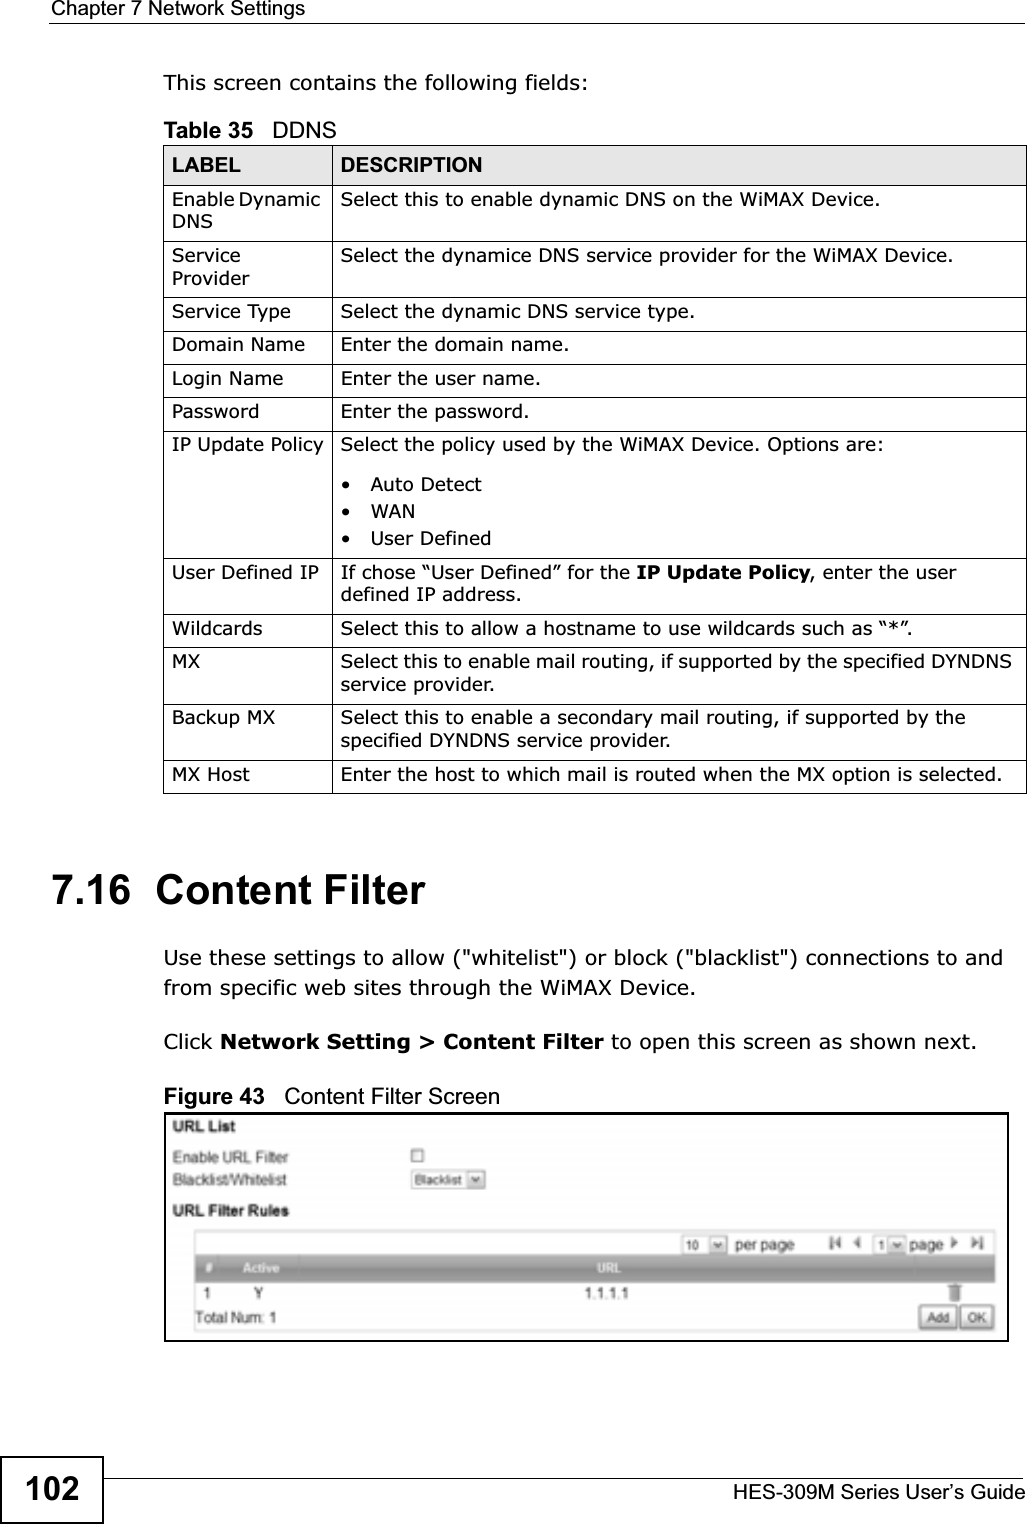 Chapter 7 Network SettingsHES-309M Series User’s Guide102This screen contains the following fields:7.16  Content FilterUse these settings to allow (&quot;whitelist&quot;) or block (&quot;blacklist&quot;) connections to and from specific web sites through the WiMAX Device.Click Network Setting &gt; Content Filter to open this screen as shown next.Figure 43   Content Filter ScreenTable 35   DDNSLABEL DESCRIPTIONEnable Dynamic DNSSelect this to enable dynamic DNS on the WiMAX Device.Service ProviderSelect the dynamice DNS service provider for the WiMAX Device.Service Type Select the dynamic DNS service type.Domain Name Enter the domain name.Login Name Enter the user name.Password Enter the password.IP Update Policy Select the policy used by the WiMAX Device. Options are:•Auto Detect•WAN•User DefinedUser Defined IP If chose “User Defined” for the IP Update Policy, enter the user defined IP address.Wildcards Select this to allow a hostname to use wildcards such as “*”.MX Select this to enable mail routing, if supported by the specified DYNDNS service provider.Backup MX Select this to enable a secondary mail routing, if supported by the specified DYNDNS service provider.MX Host Enter the host to which mail is routed when the MX option is selected.